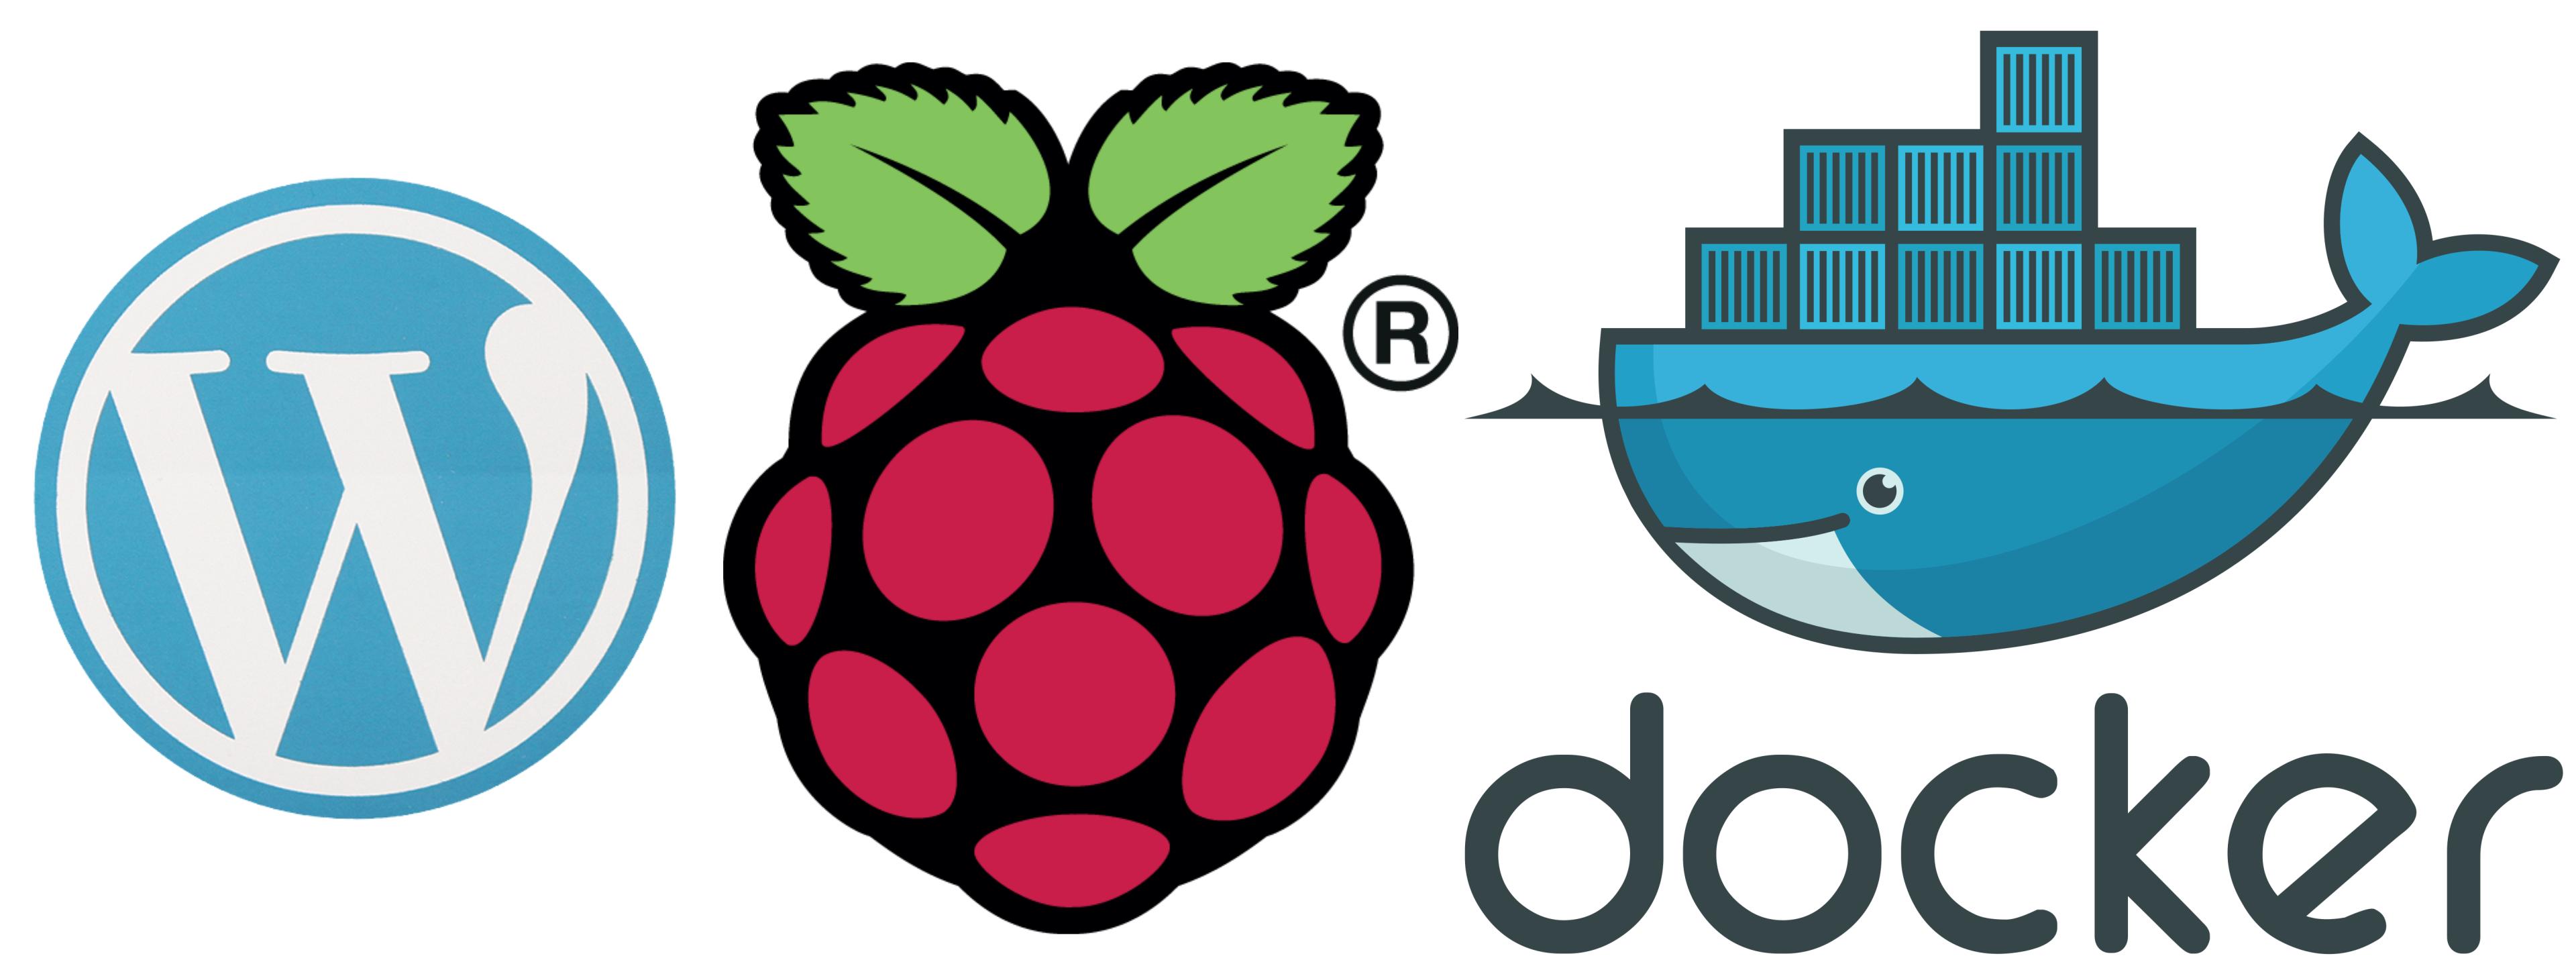 #1 Installing WordPress on a Raspberry Pi with docker-compose in under 10 minutes